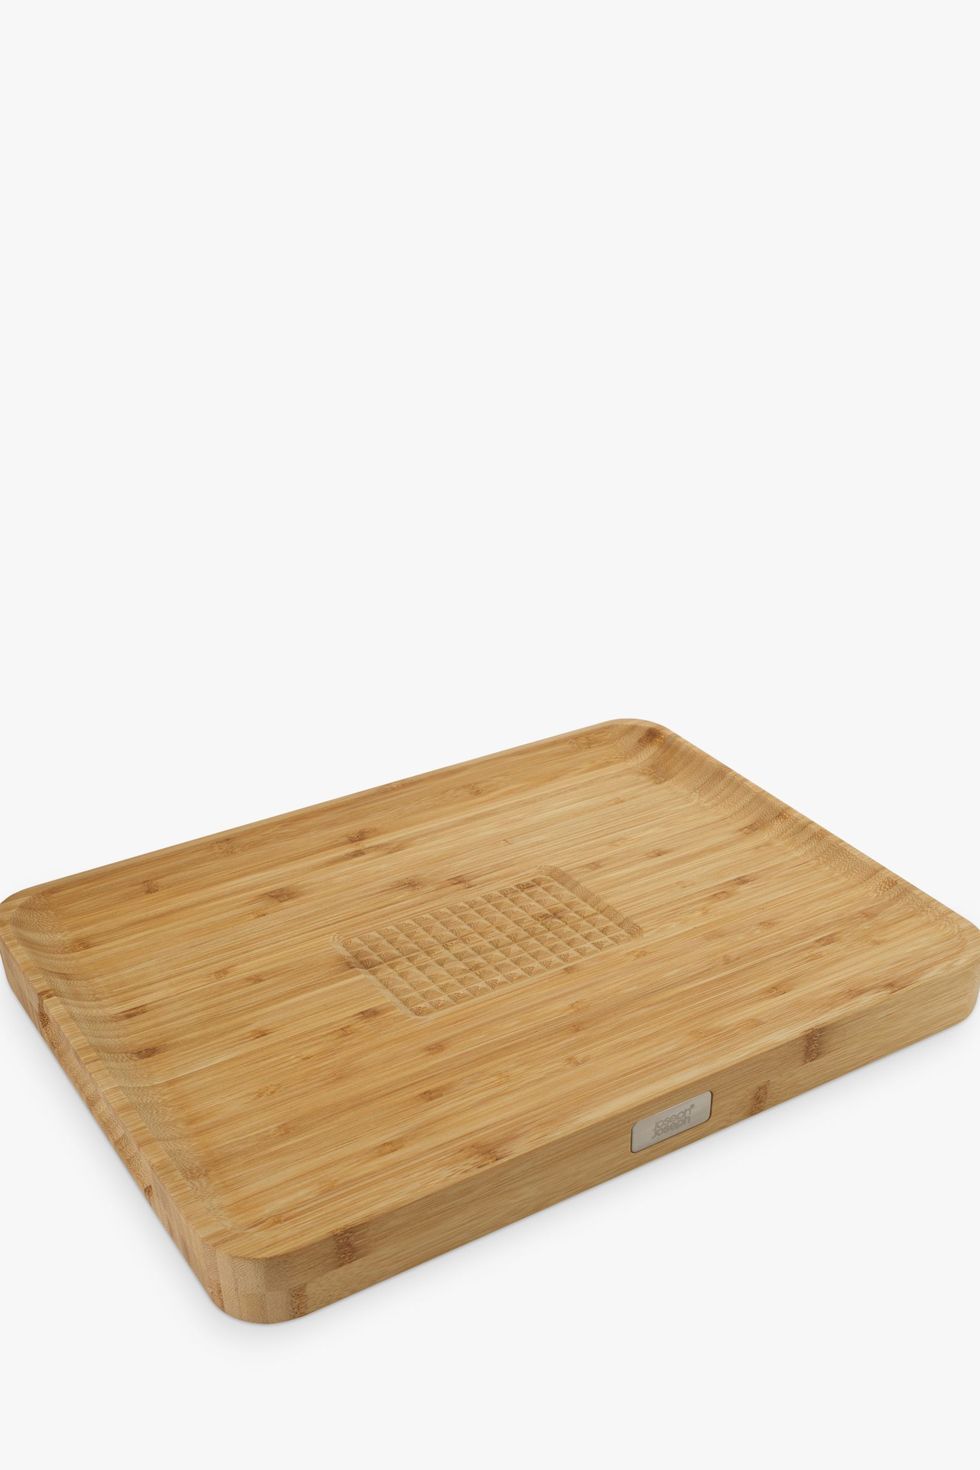 Cut and Carve Bamboo Chopping Board